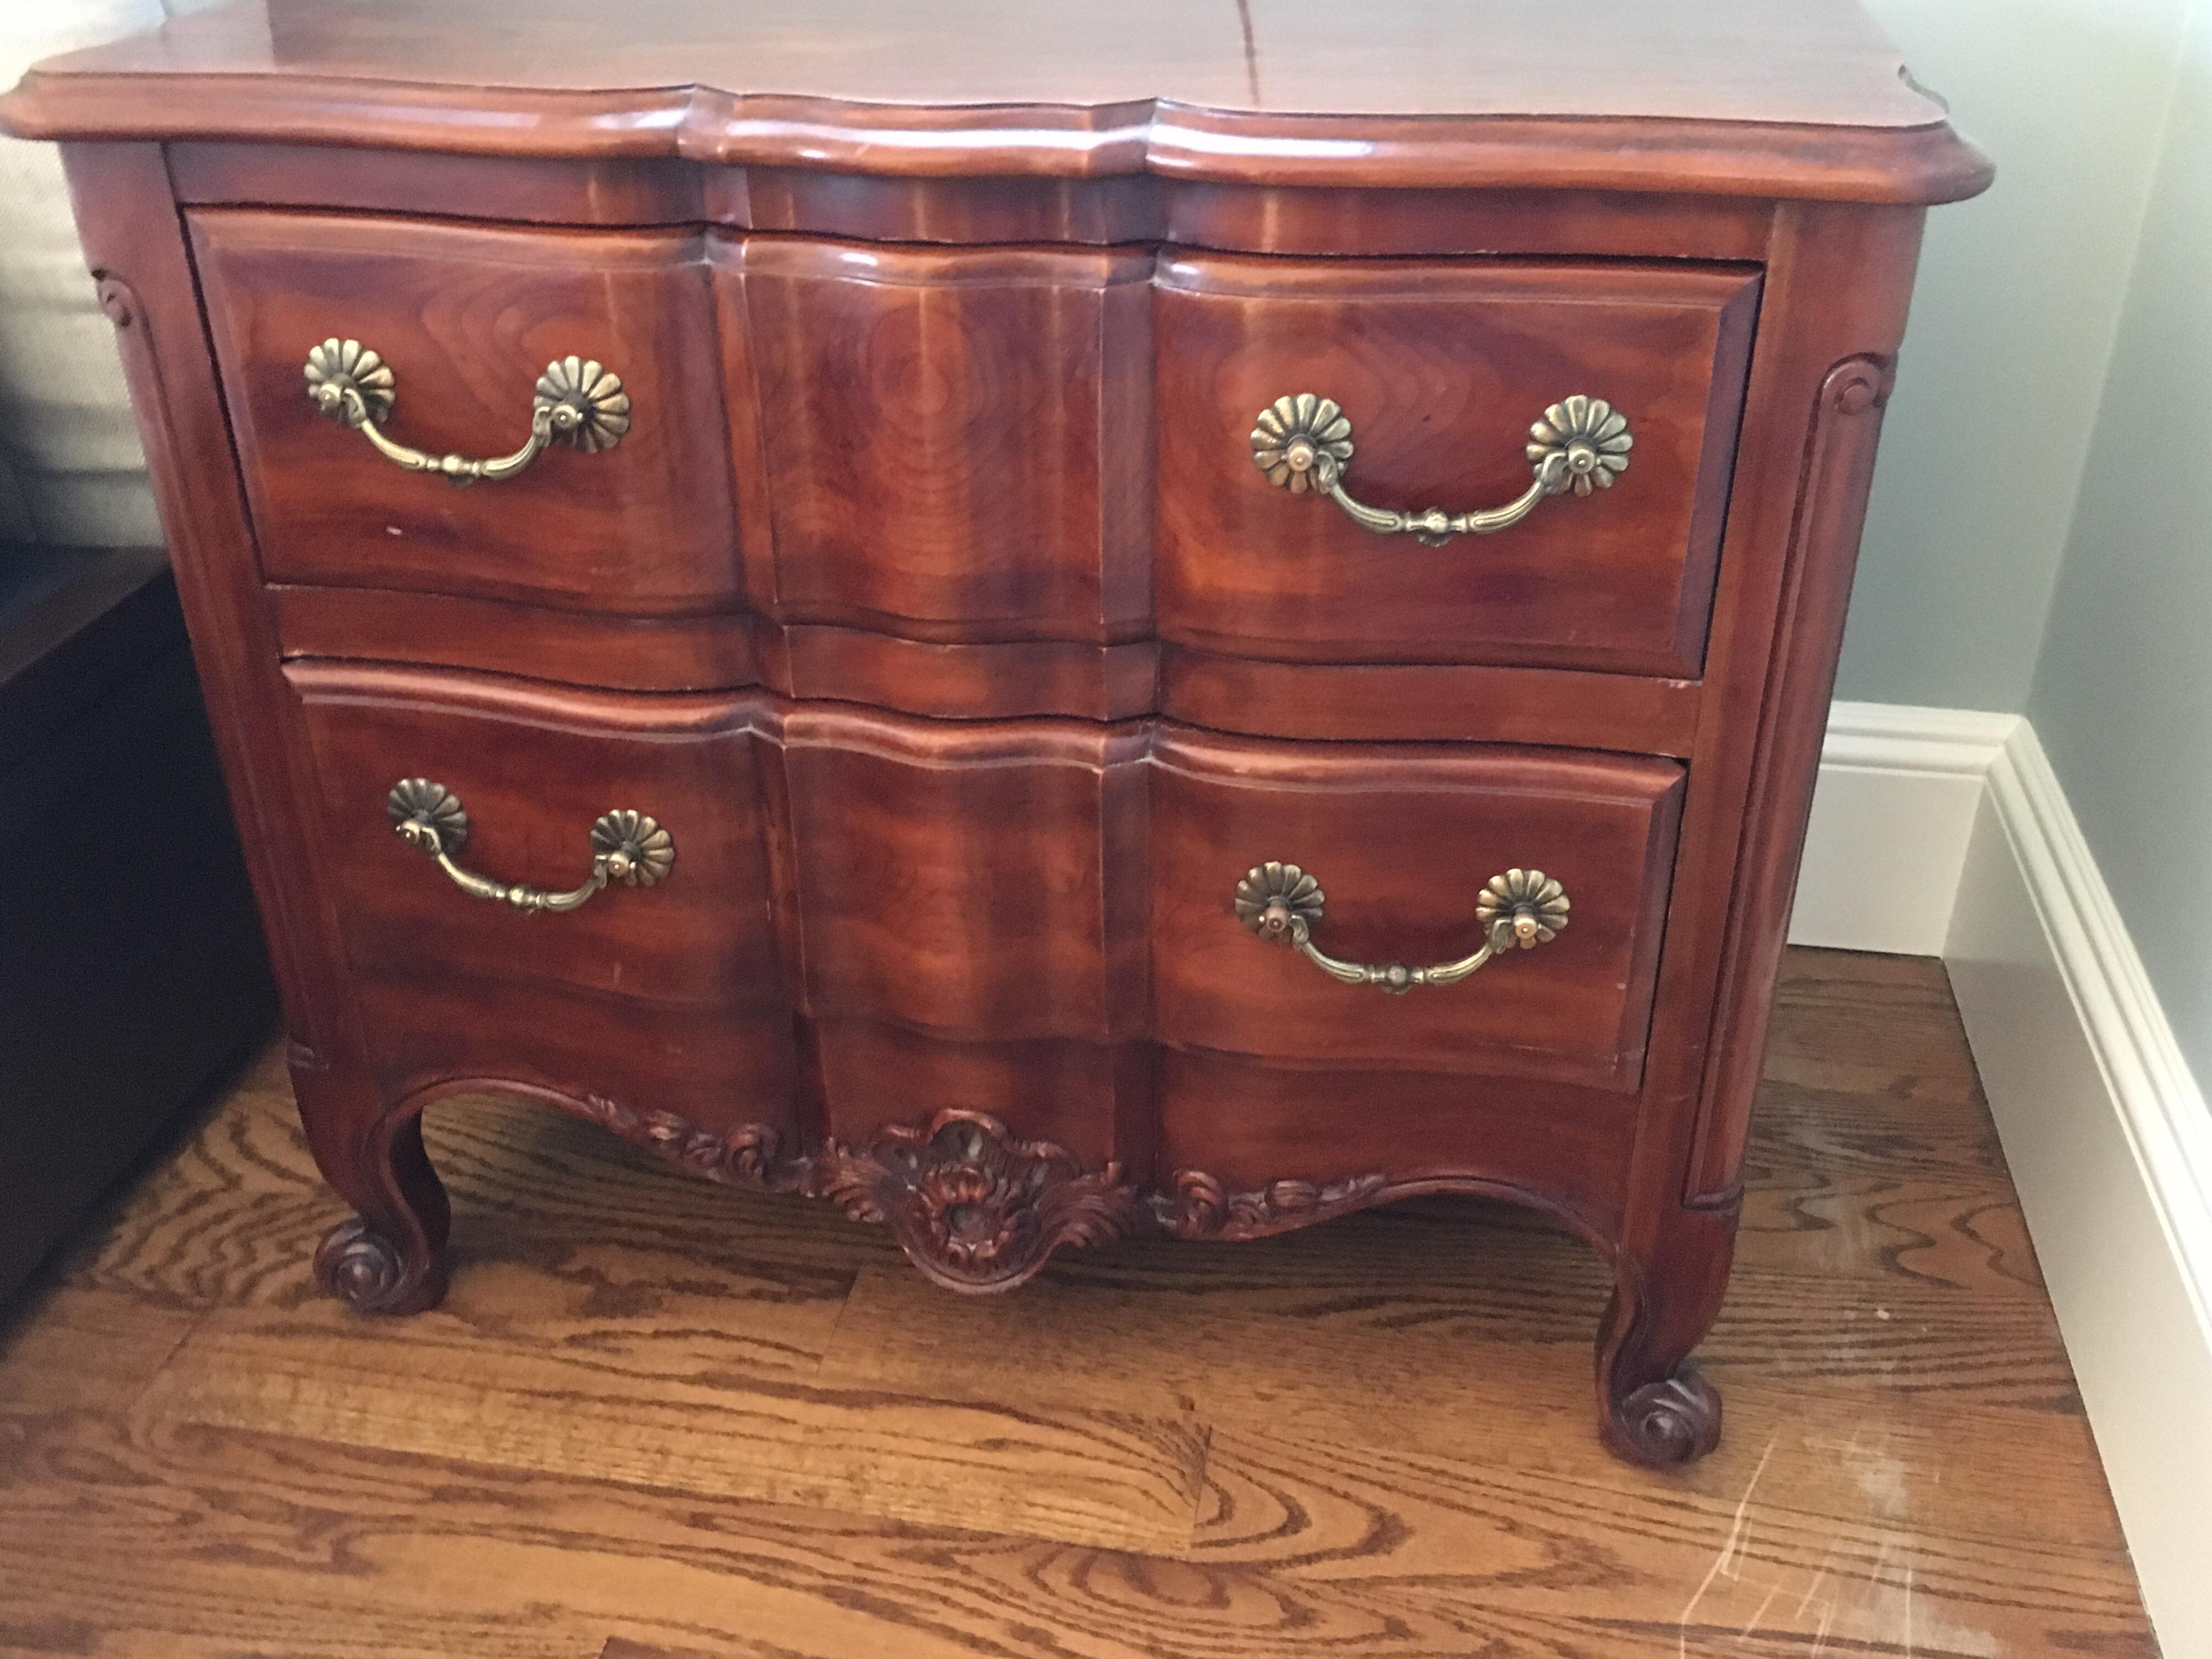 American Pair of French Provincial Style Bedside Tables by John Widdicomb